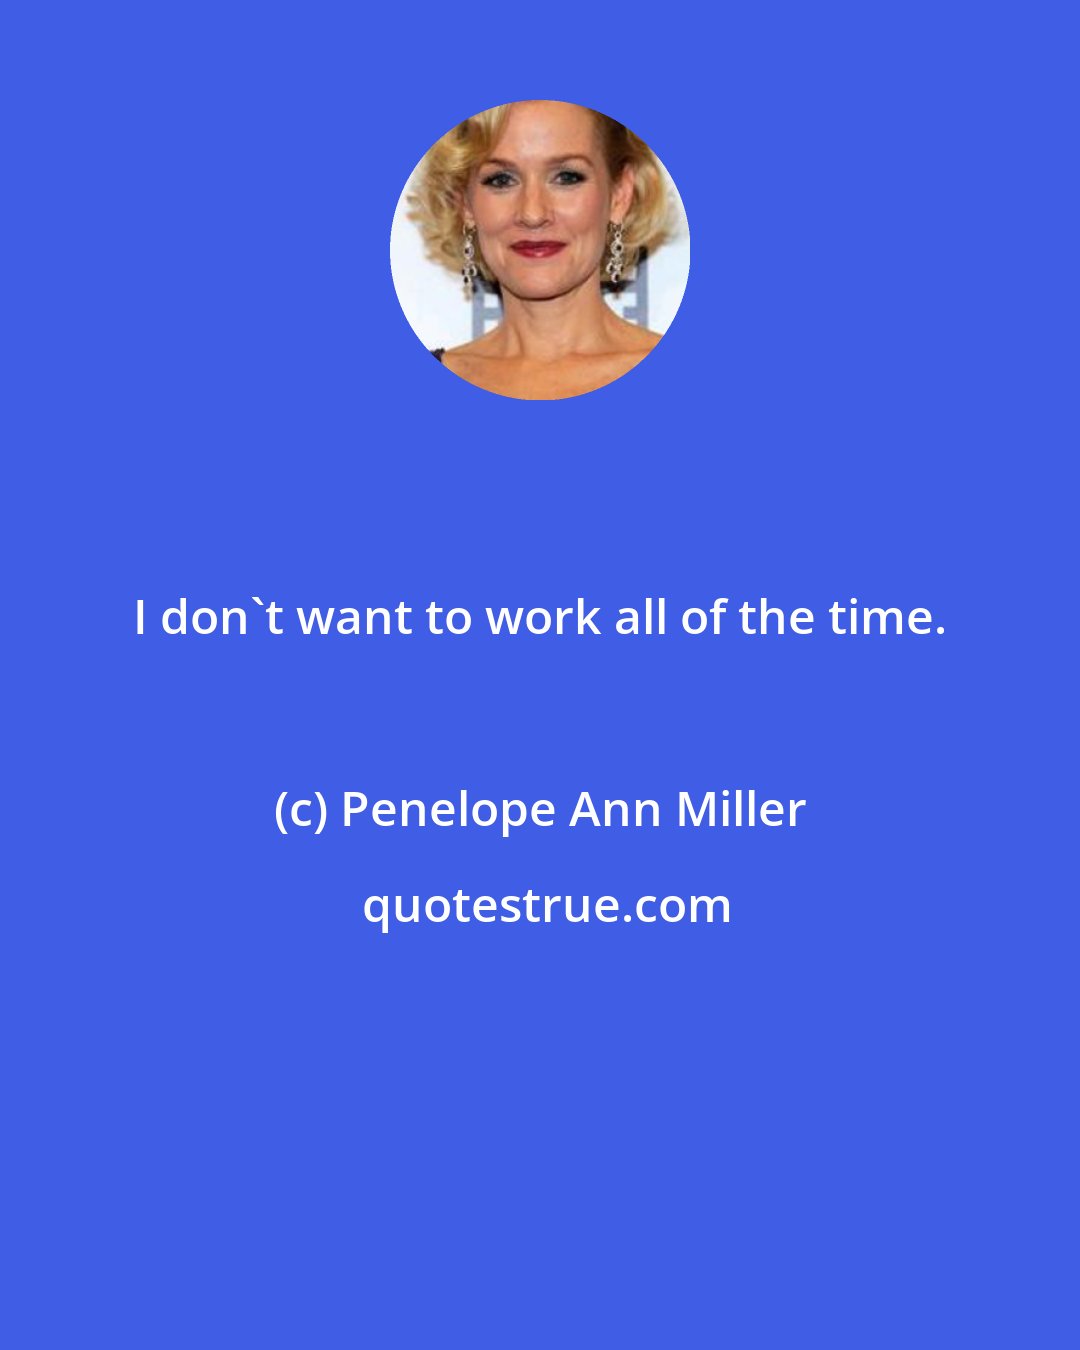 Penelope Ann Miller: I don't want to work all of the time.